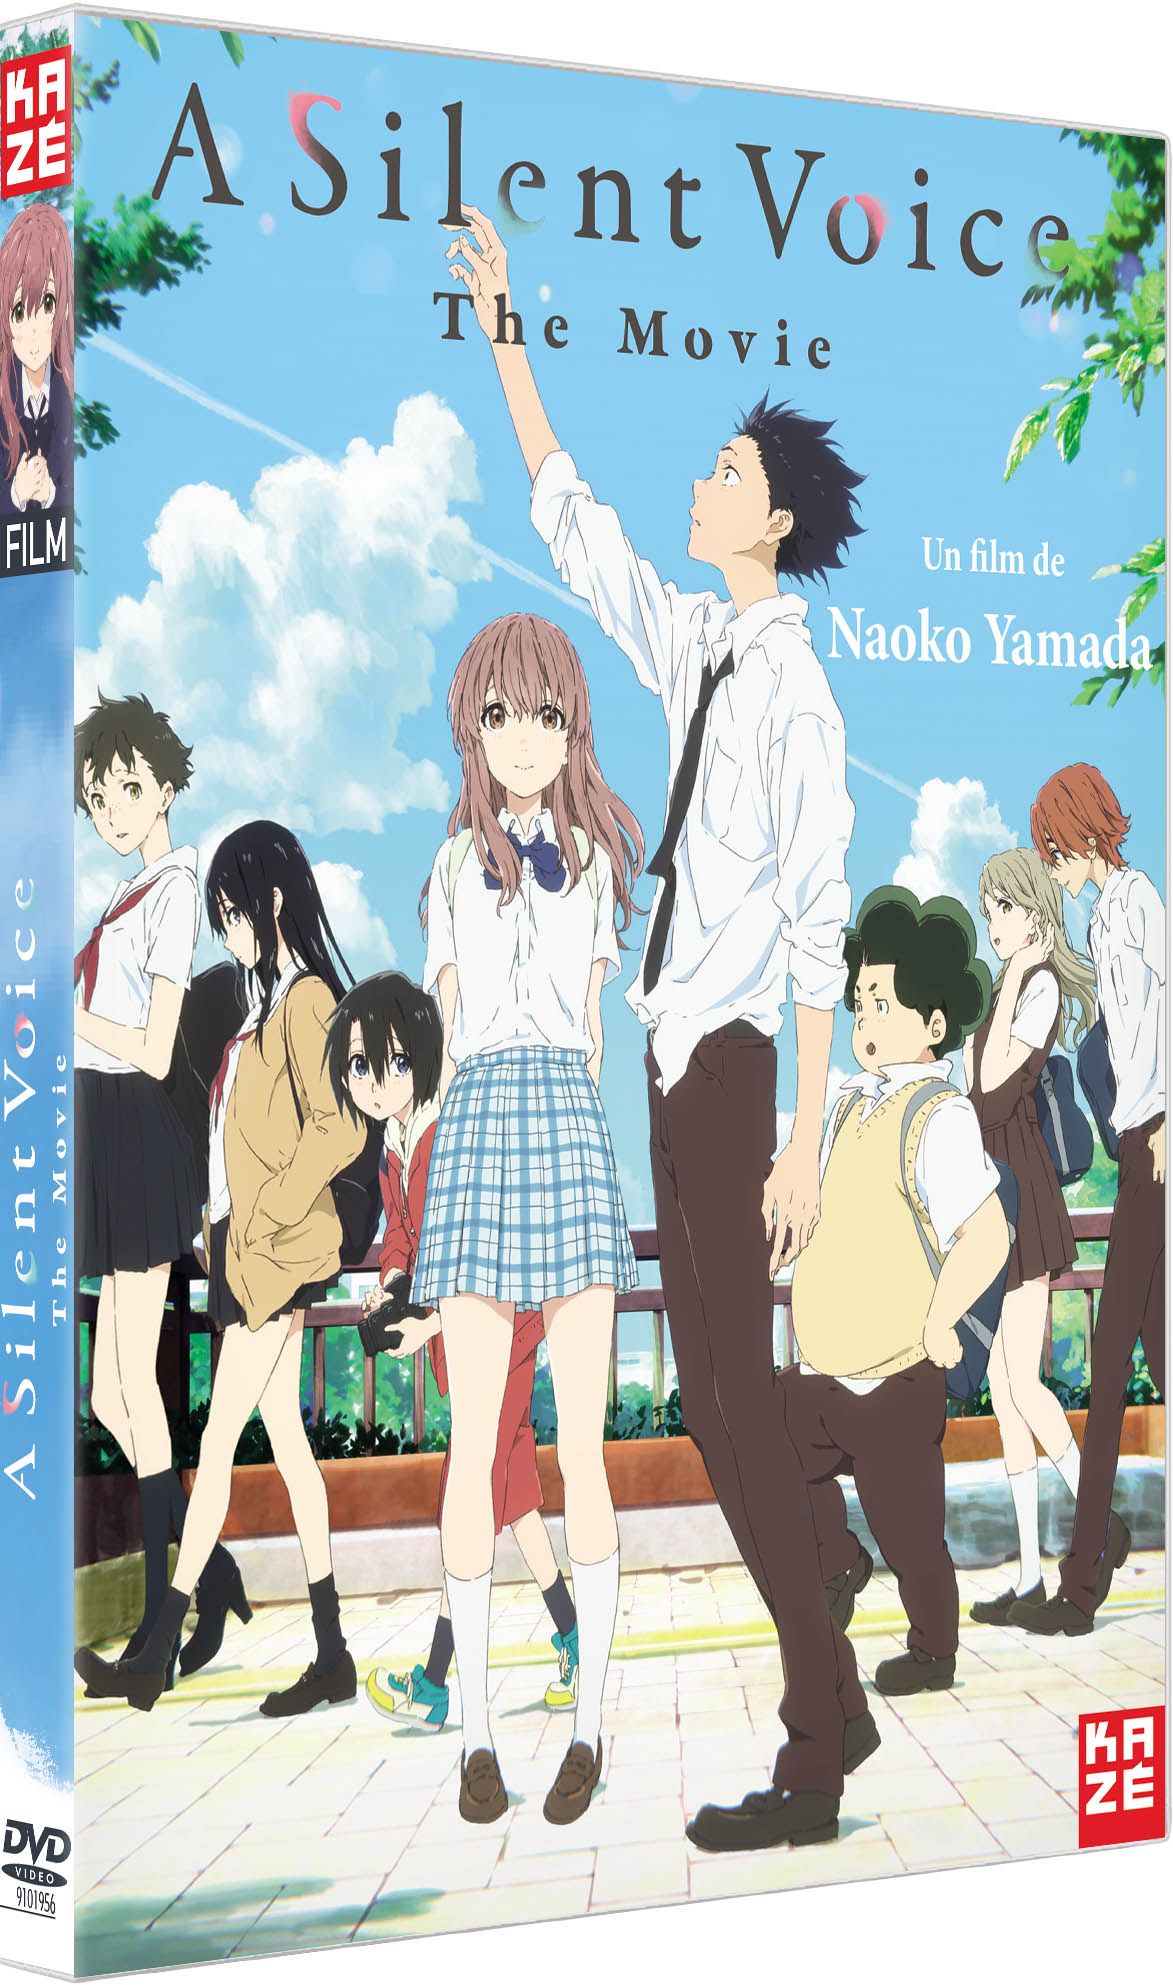 A Silent Voice - The Movie DVD